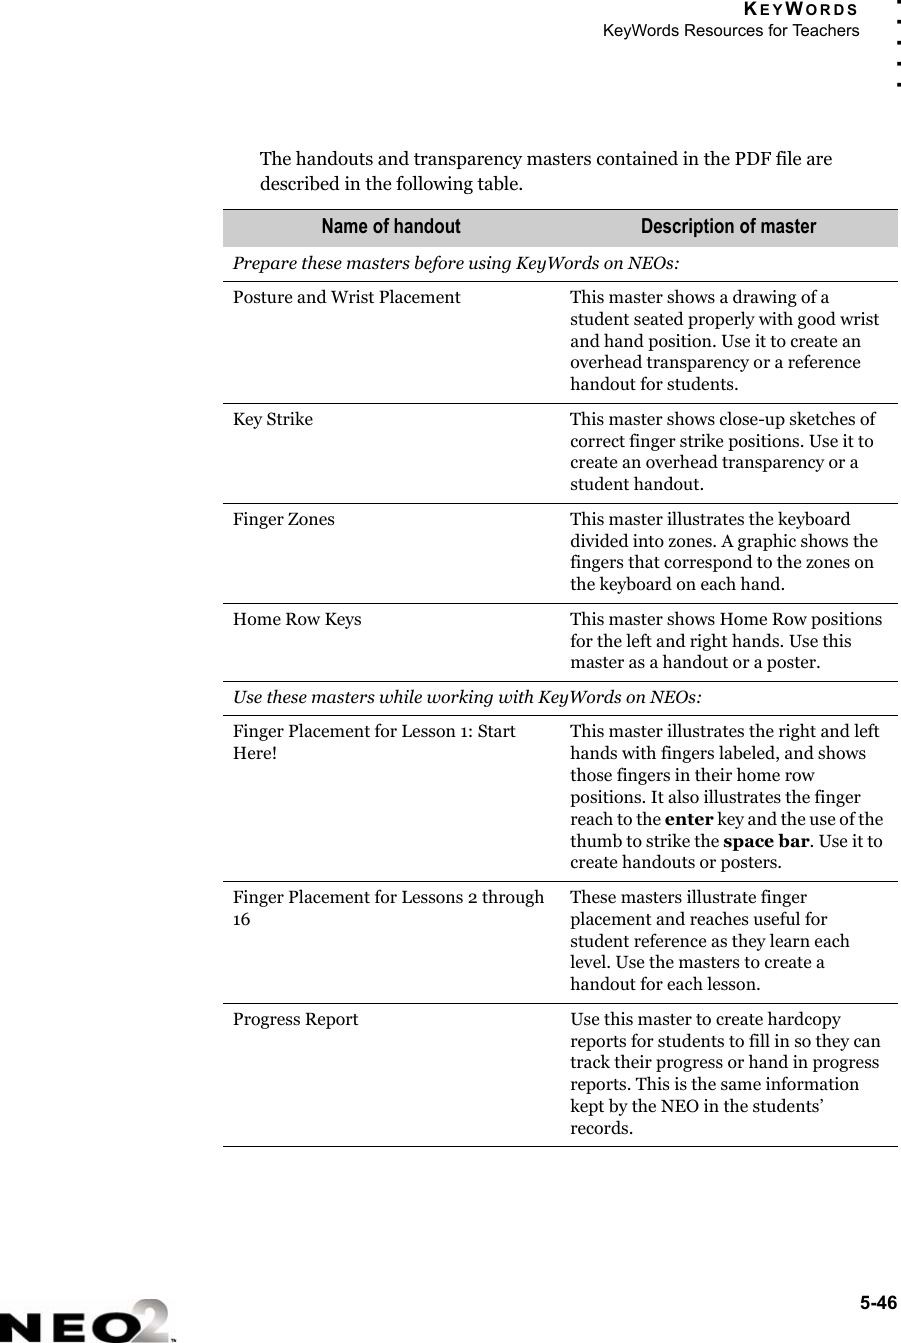 KEYWORDSKeyWords Resources for Teachers5-46. . . . .The handouts and transparency masters contained in the PDF file are described in the following table.Name of handout Description of masterPrepare these masters before using KeyWords on NEOs:Posture and Wrist Placement This master shows a drawing of a student seated properly with good wrist and hand position. Use it to create an overhead transparency or a reference handout for students. Key Strike This master shows close-up sketches of correct finger strike positions. Use it to create an overhead transparency or a student handout. Finger Zones This master illustrates the keyboard divided into zones. A graphic shows the fingers that correspond to the zones on the keyboard on each hand.Home Row Keys This master shows Home Row positions for the left and right hands. Use this master as a handout or a poster.Use these masters while working with KeyWords on NEOs:Finger Placement for Lesson 1: Start Here! This master illustrates the right and left hands with fingers labeled, and shows those fingers in their home row positions. It also illustrates the finger reach to the enter key and the use of the thumb to strike the space bar. Use it to create handouts or posters.Finger Placement for Lessons 2 through 16These masters illustrate finger placement and reaches useful for student reference as they learn each level. Use the masters to create a handout for each lesson.Progress Report Use this master to create hardcopy reports for students to fill in so they can track their progress or hand in progress reports. This is the same information kept by the NEO in the students’ records.